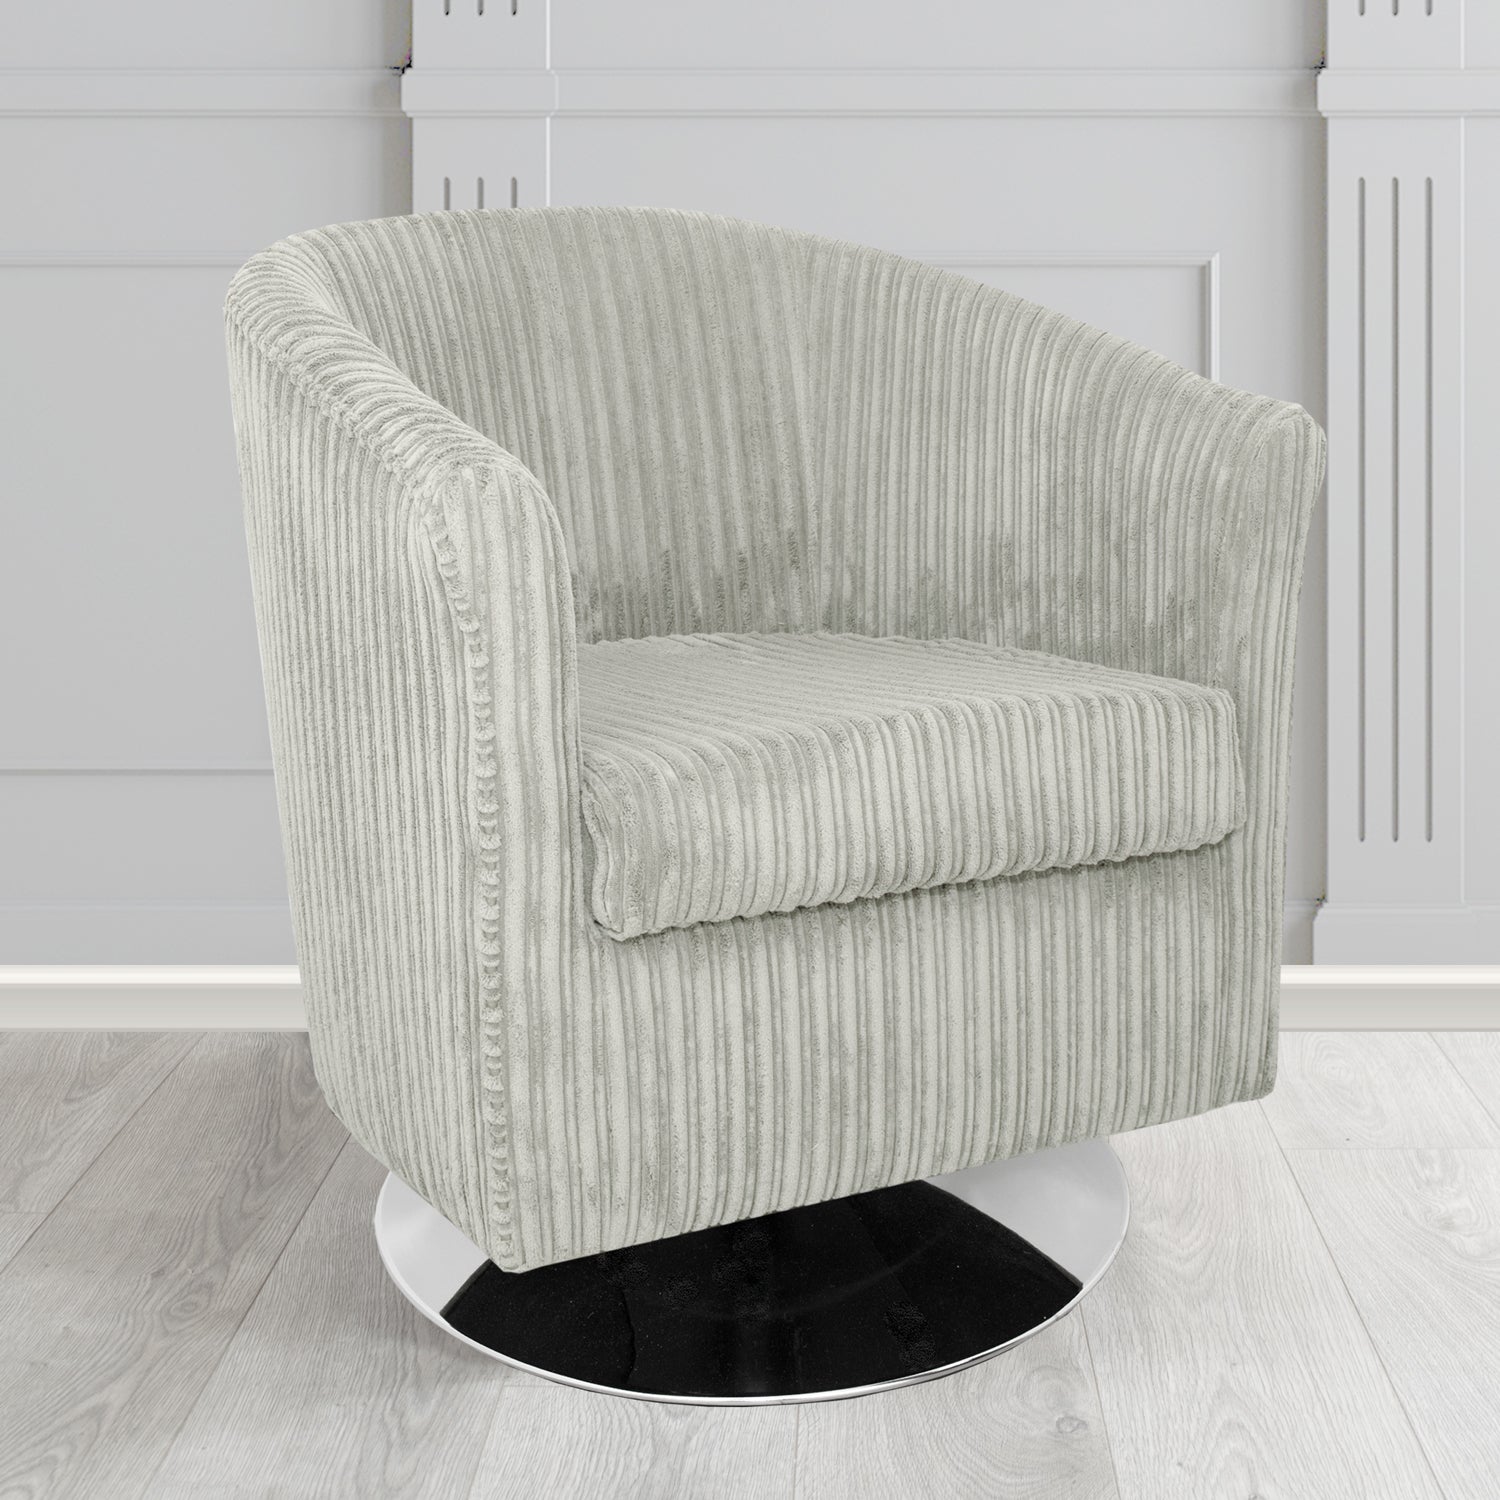 Tuscany Conway Silver Plain Texture Fabric Swivel Tub Chair (6581747974186)